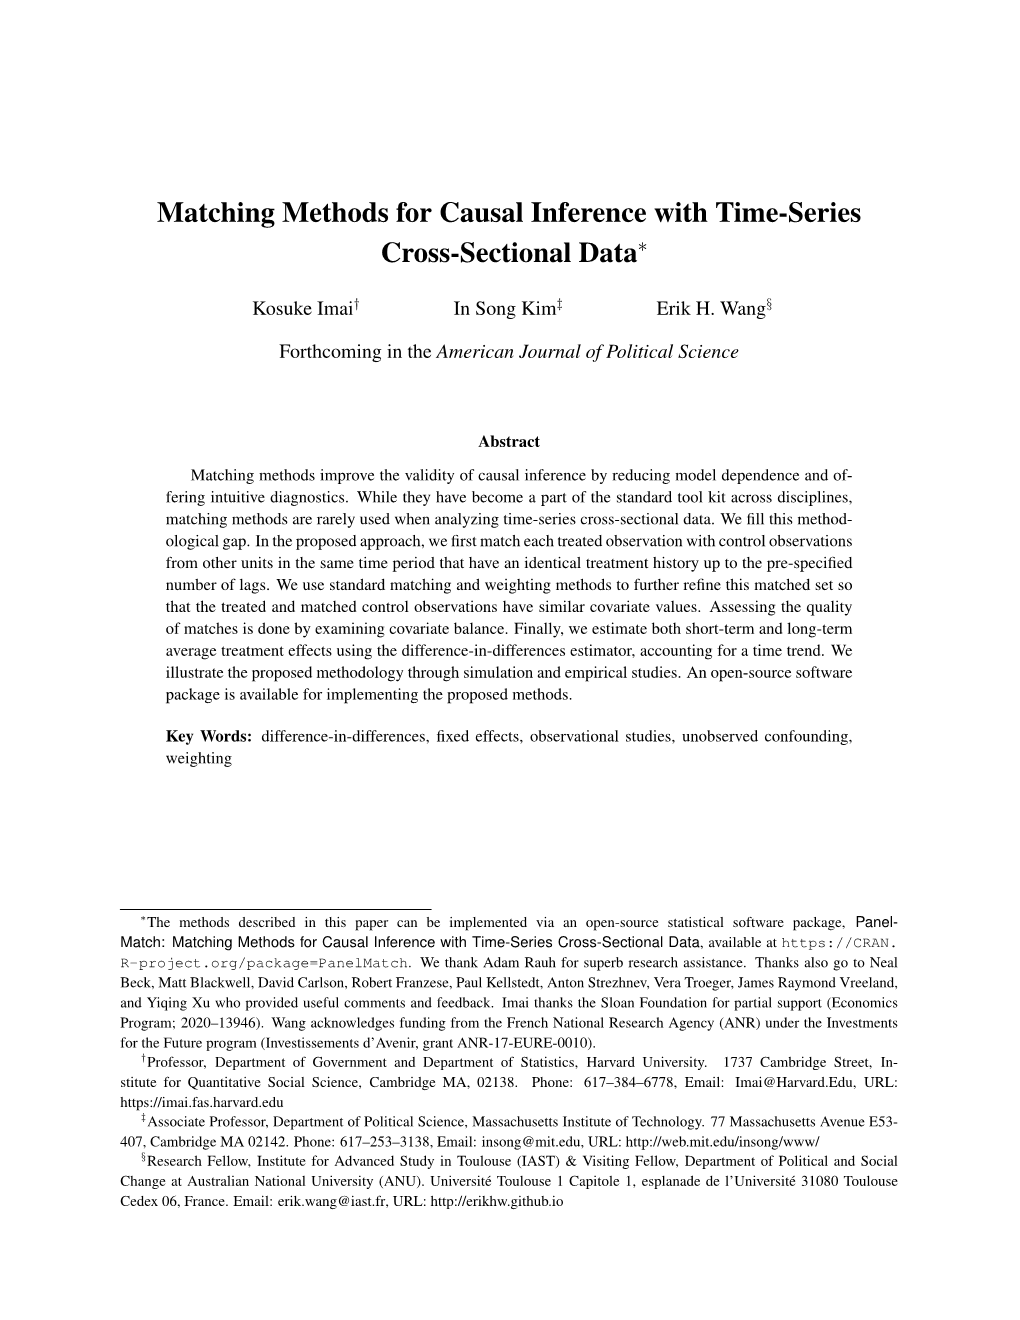 Matching Methods for Causal Inference with Time-Series Cross-Sectional Data∗